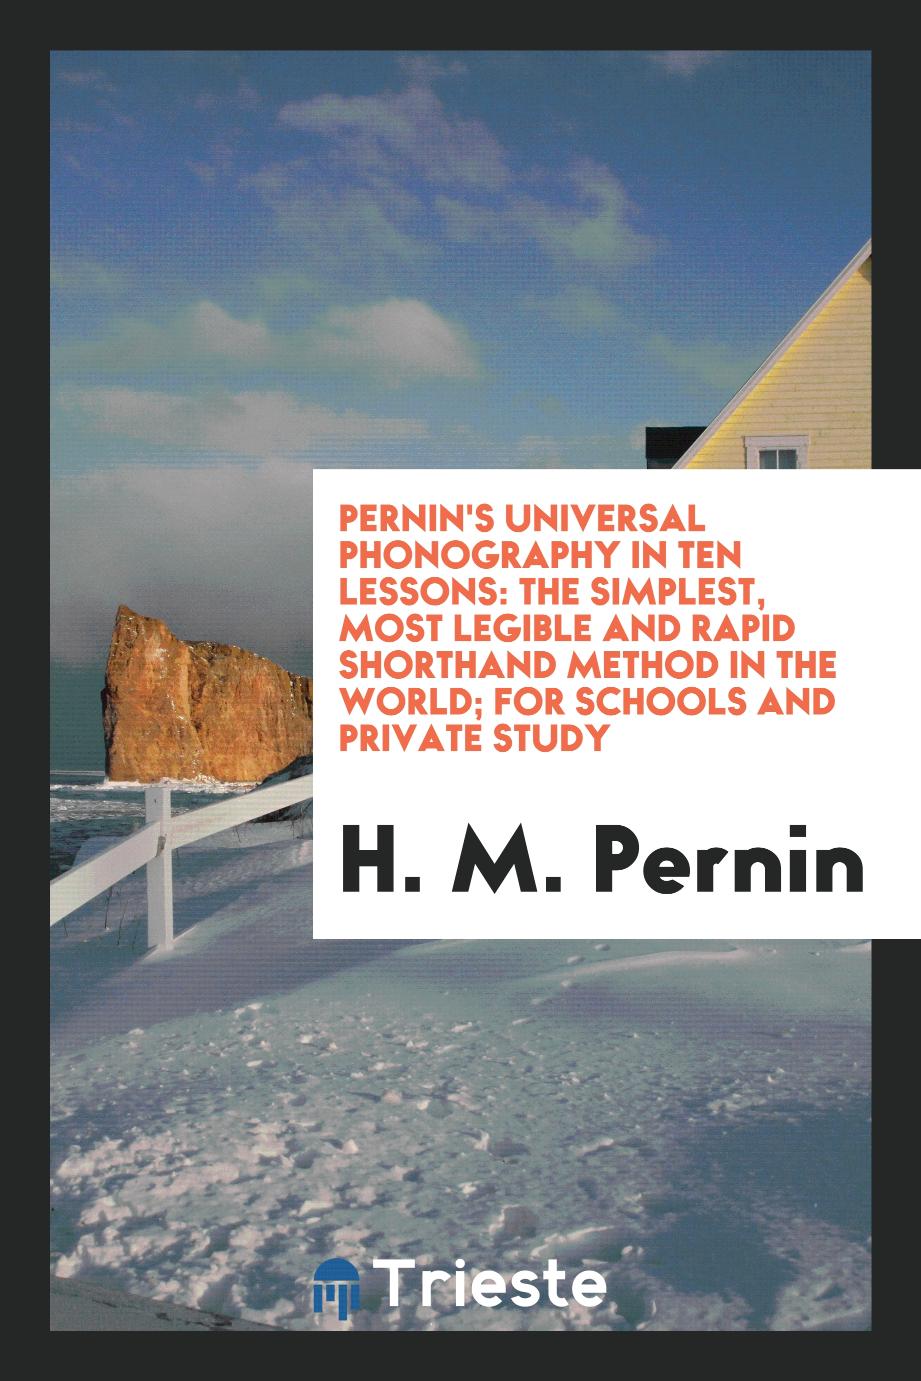 Pernin's universal phonography in ten lessons: the simplest, most legible and rapid shorthand method in the world; for schools and private study